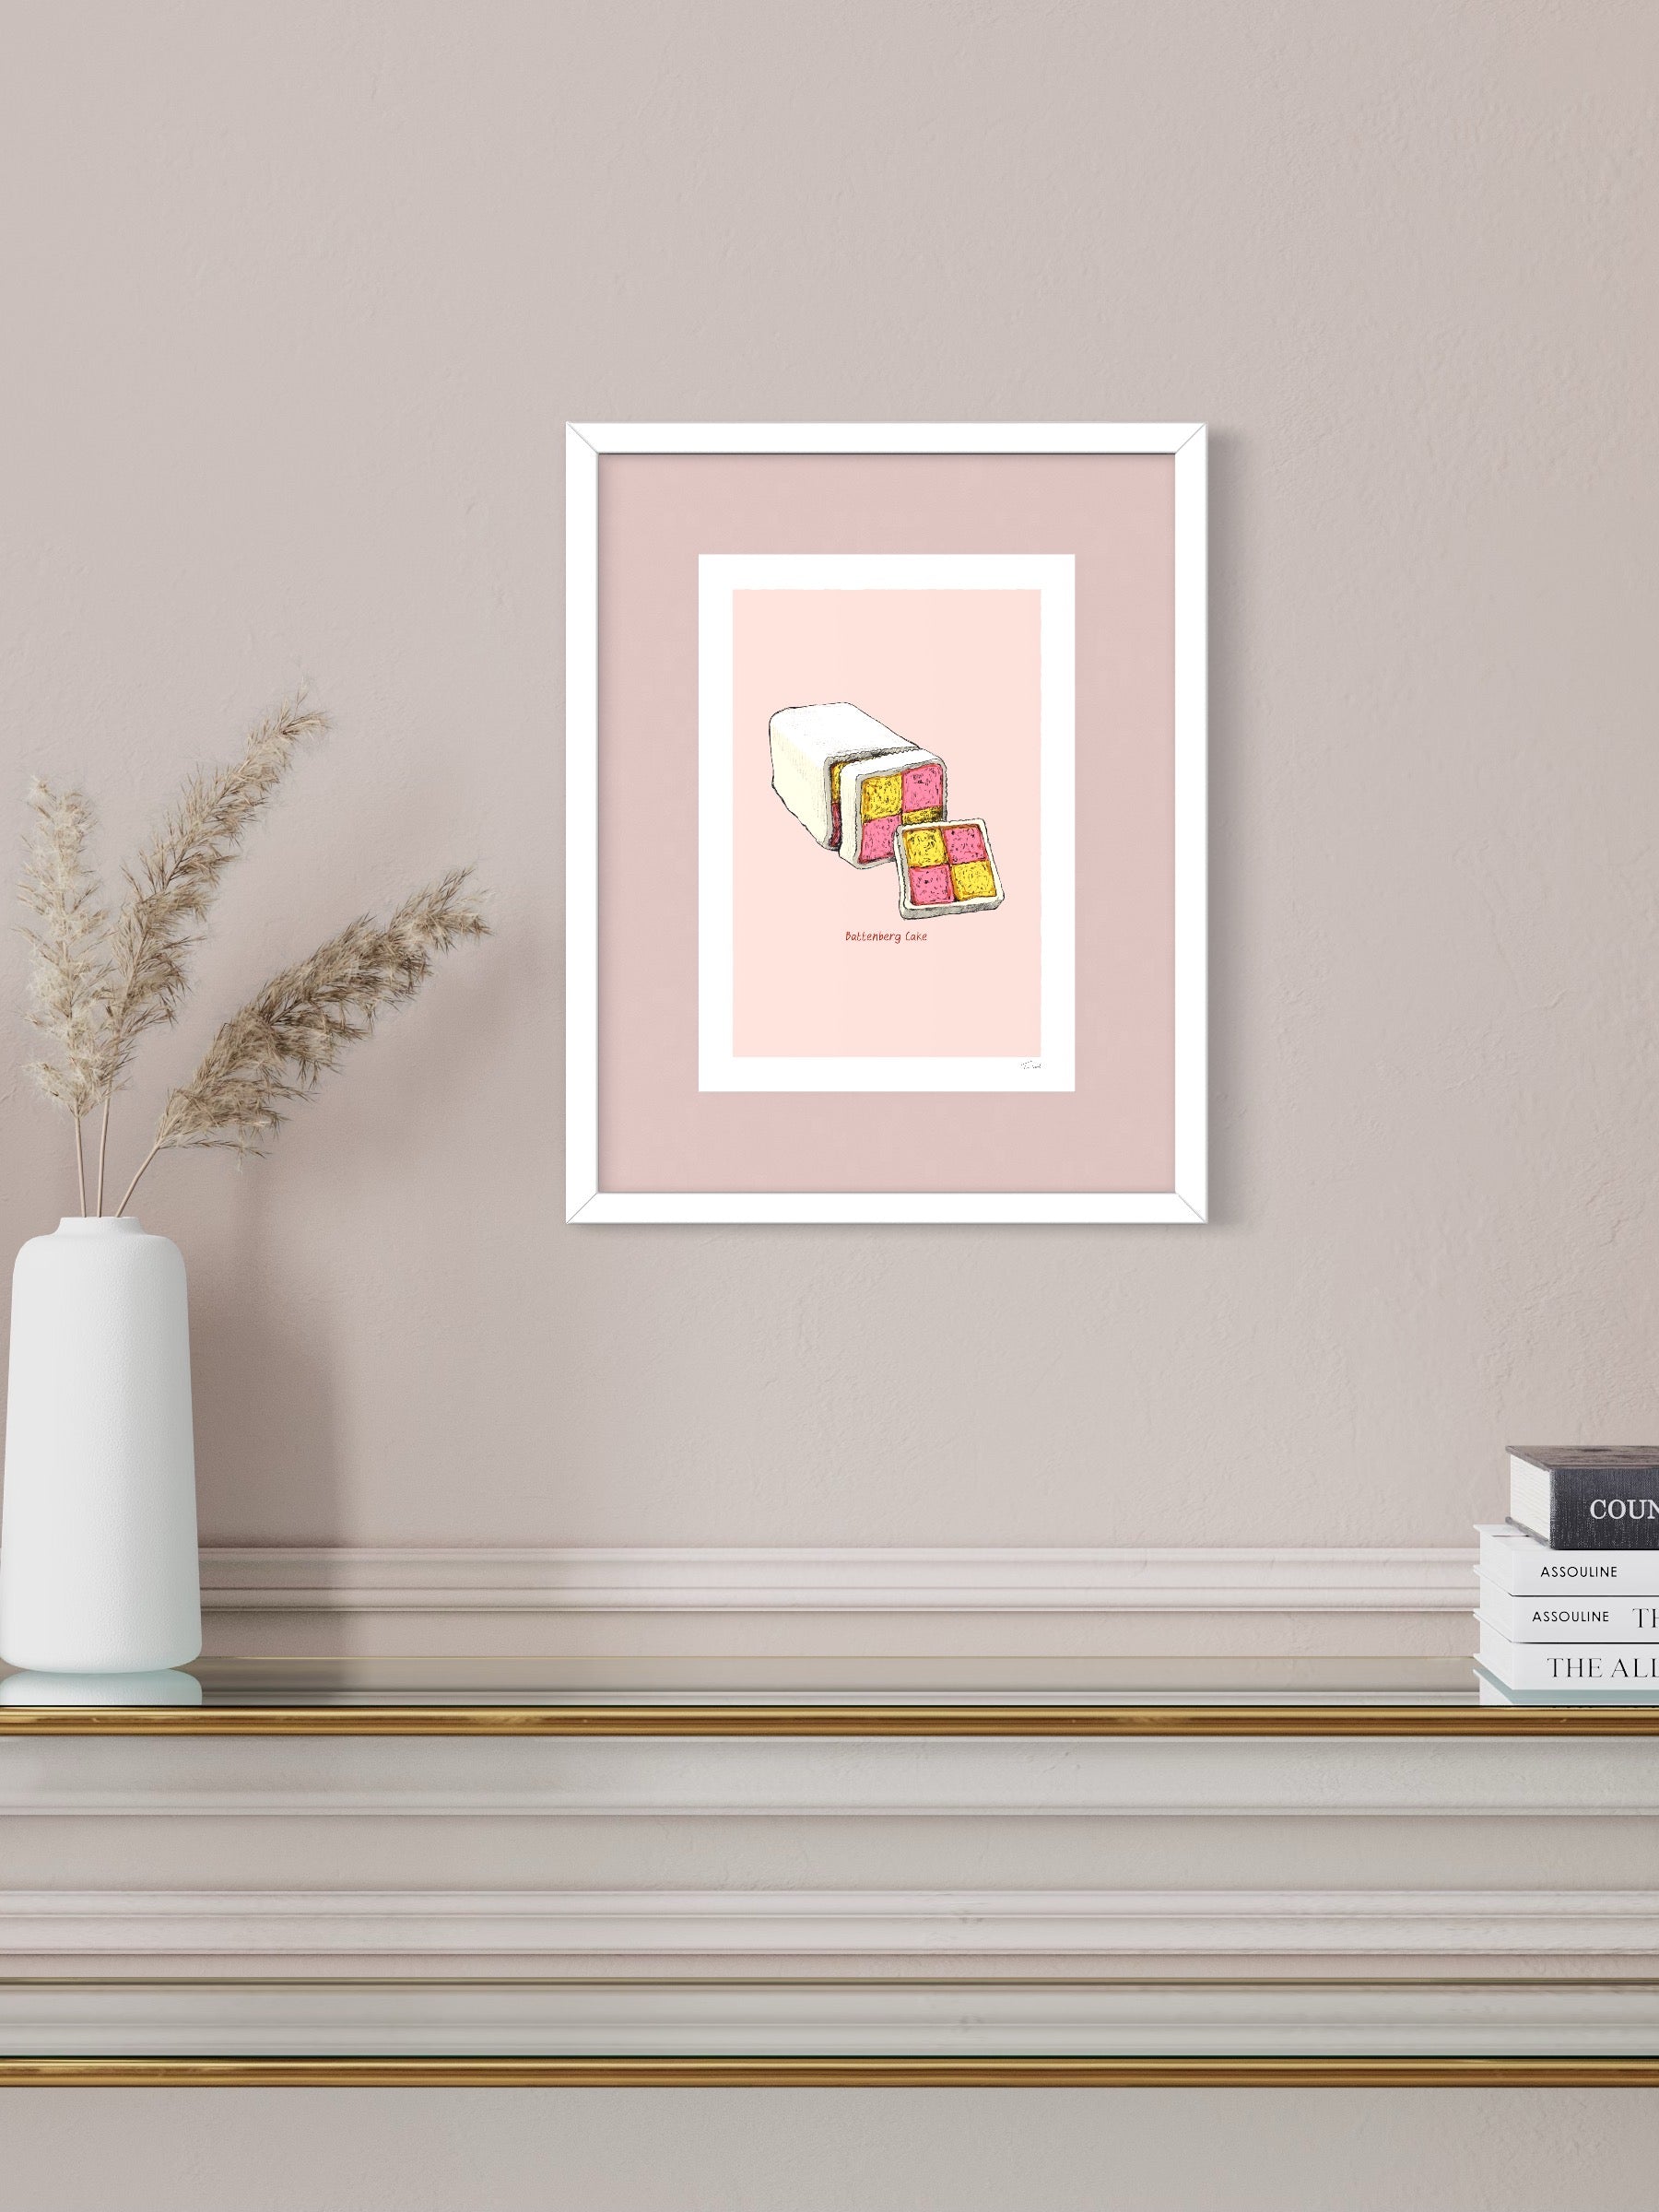 This image shows a giclee wall art print by Tom Laird Illustration of a Battenberg Cake, framed in a beautiful living room with tasteful modern home decor. This art print is available from Tom Laird Illustration in various sizes.